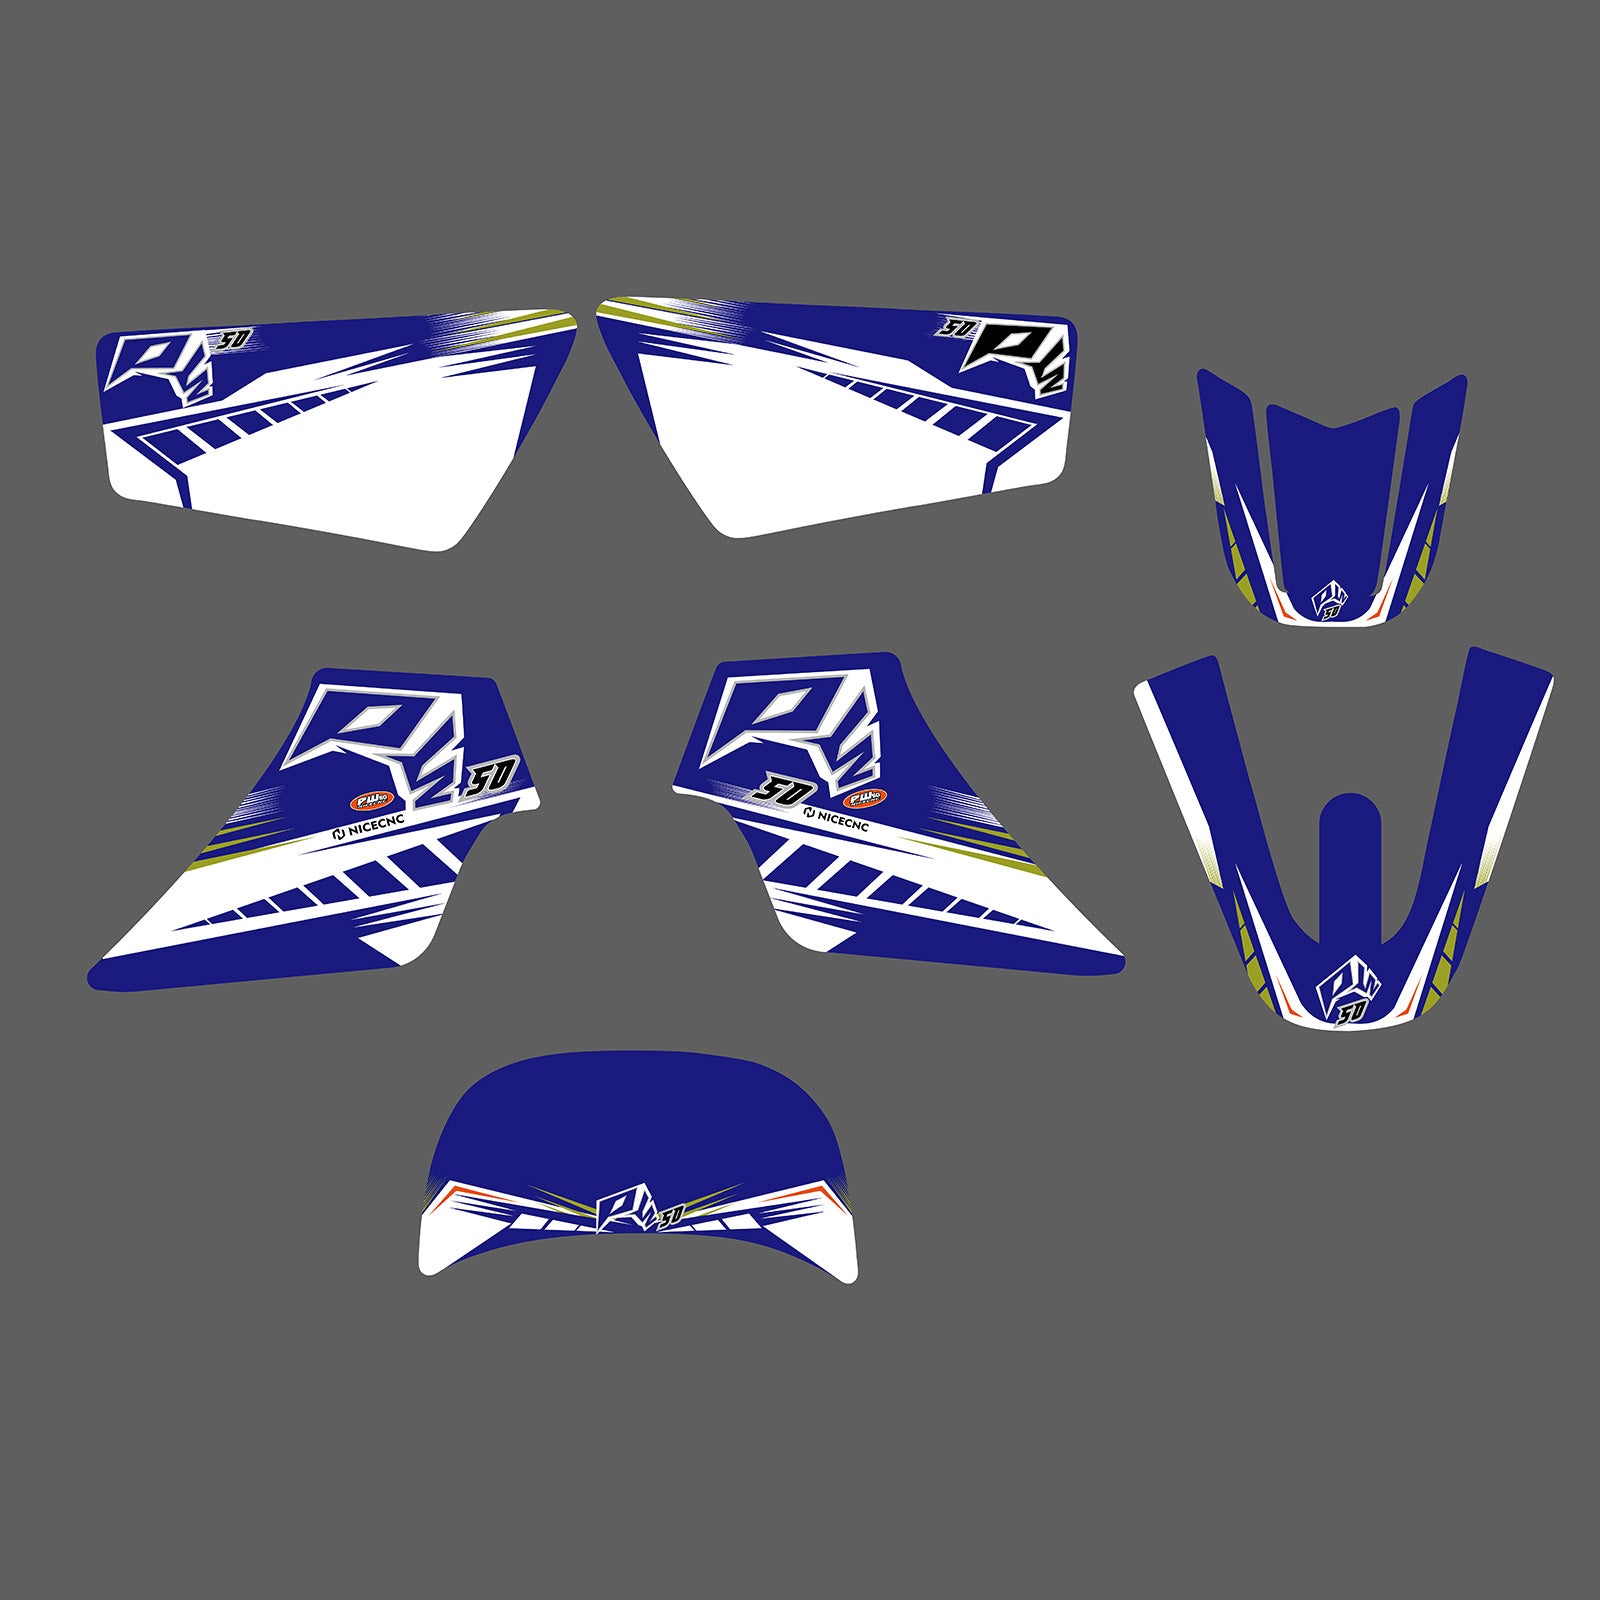 Motorcycle Team Full Graphics Background Sticker Decal Kits For YAMAHA PW50 ALL YEARS